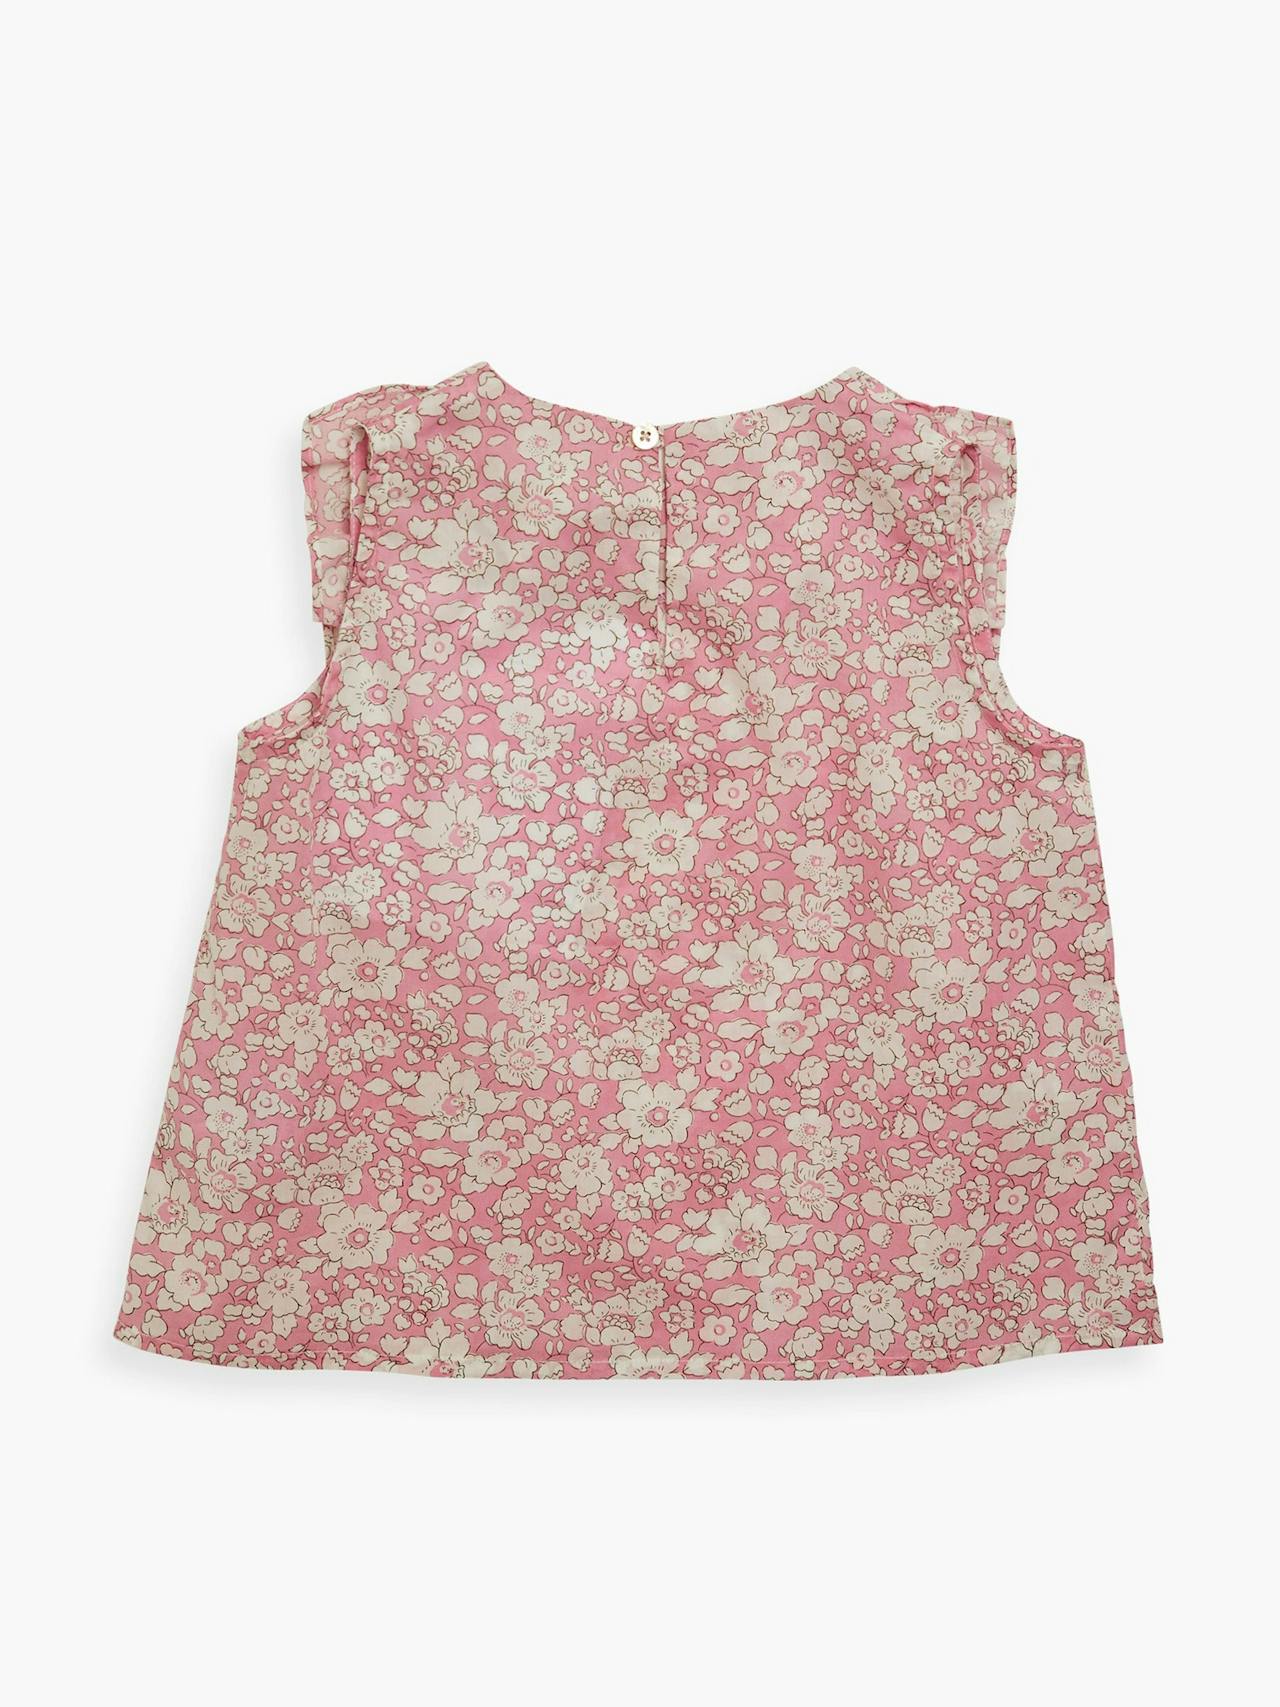 Alice top Betsy boo pink liberty